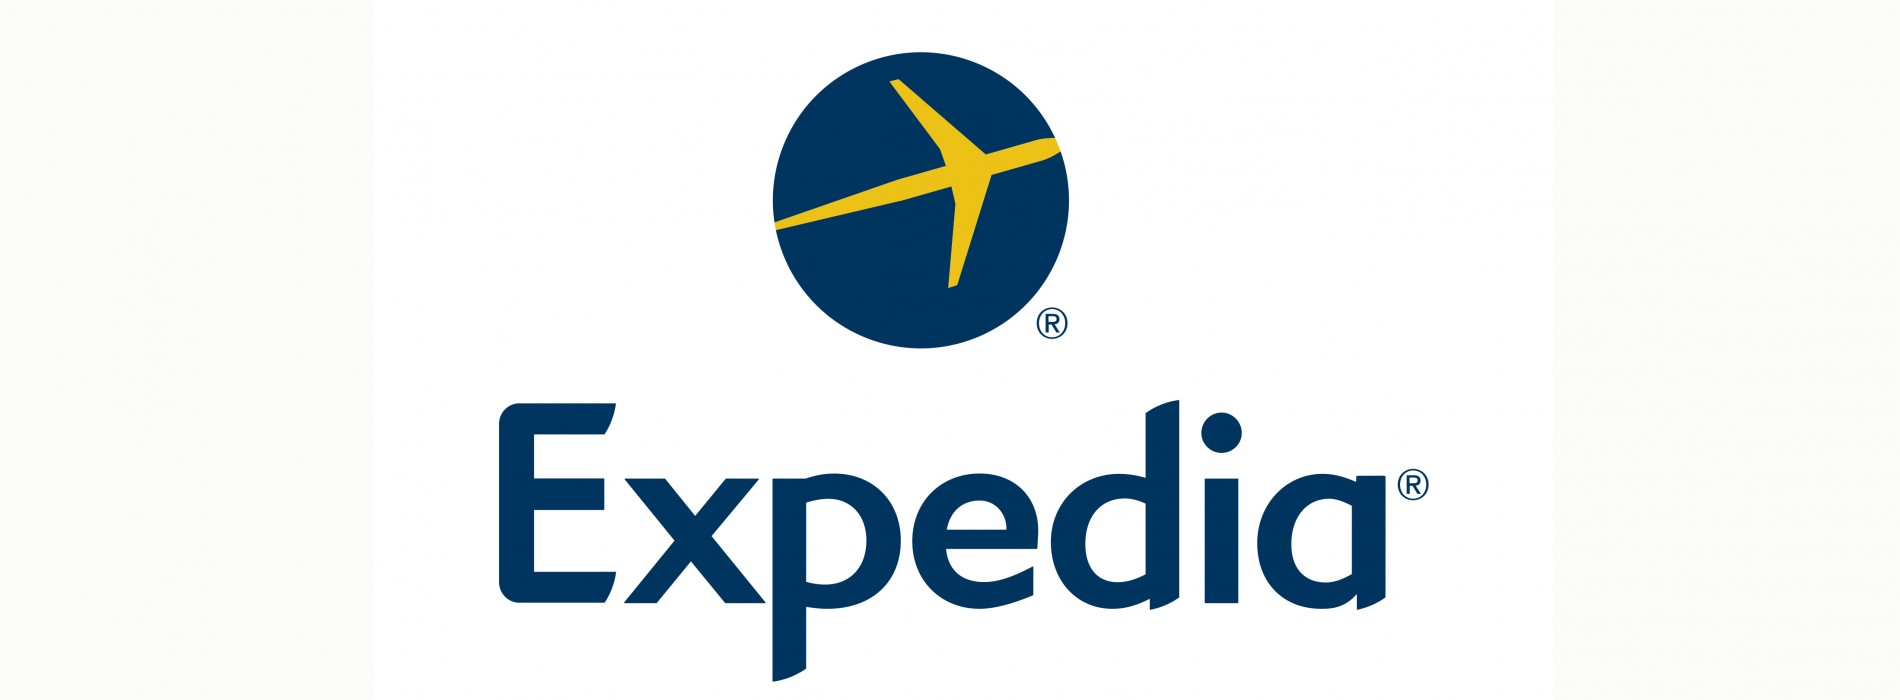 Expedia launches a new product ‘Add-On Advantage’